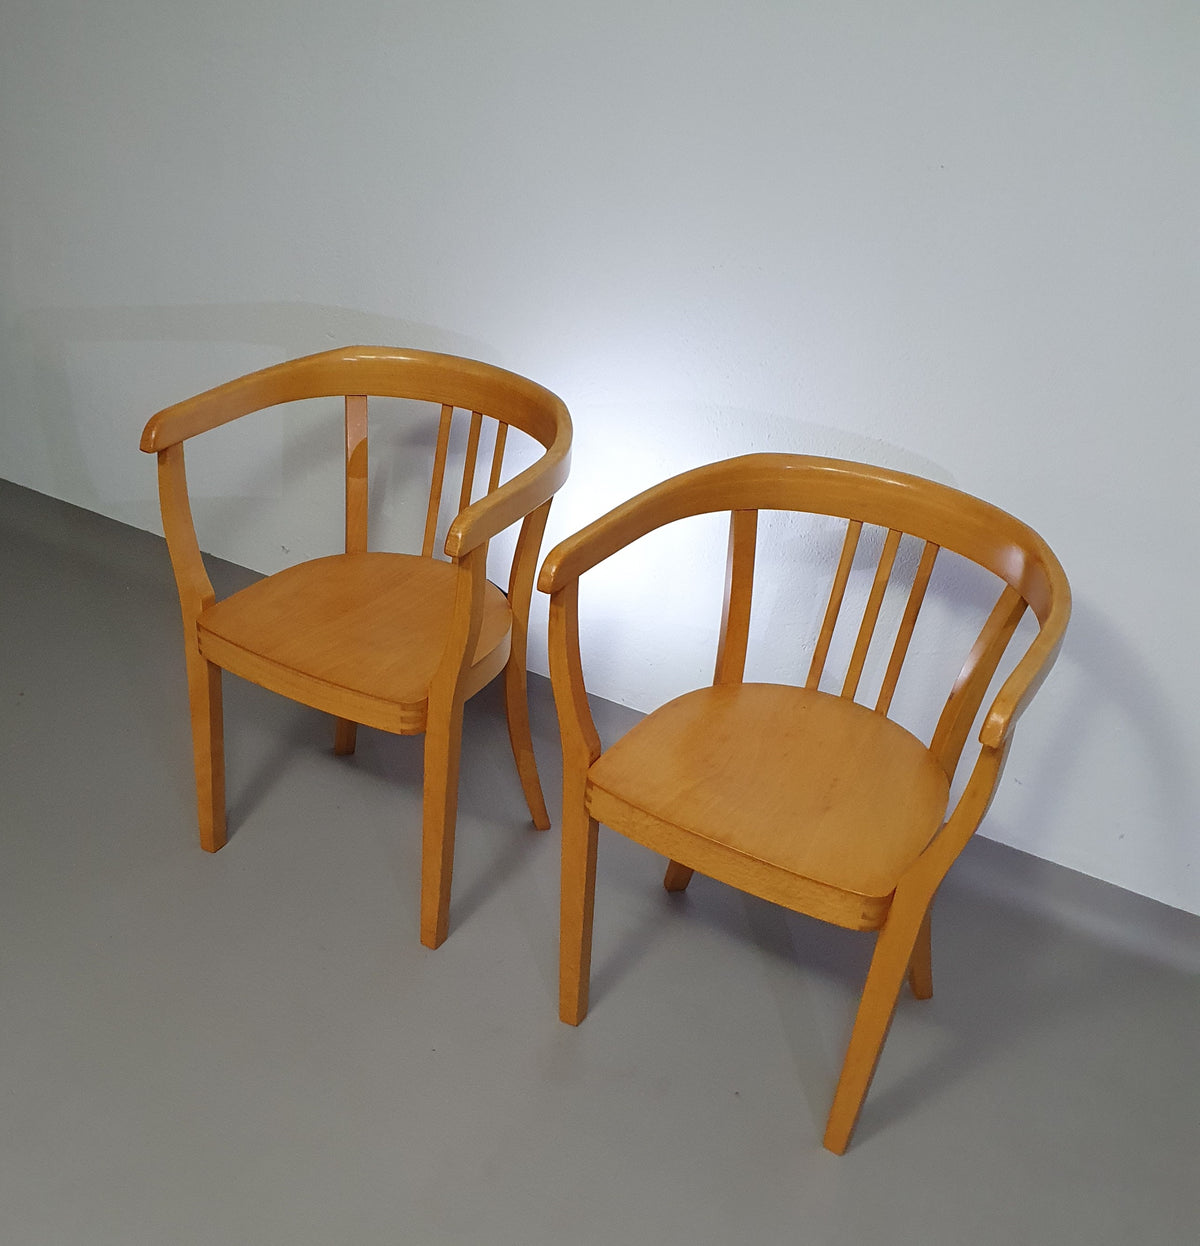 2 x Art Deco arm chairs in beautiful condition